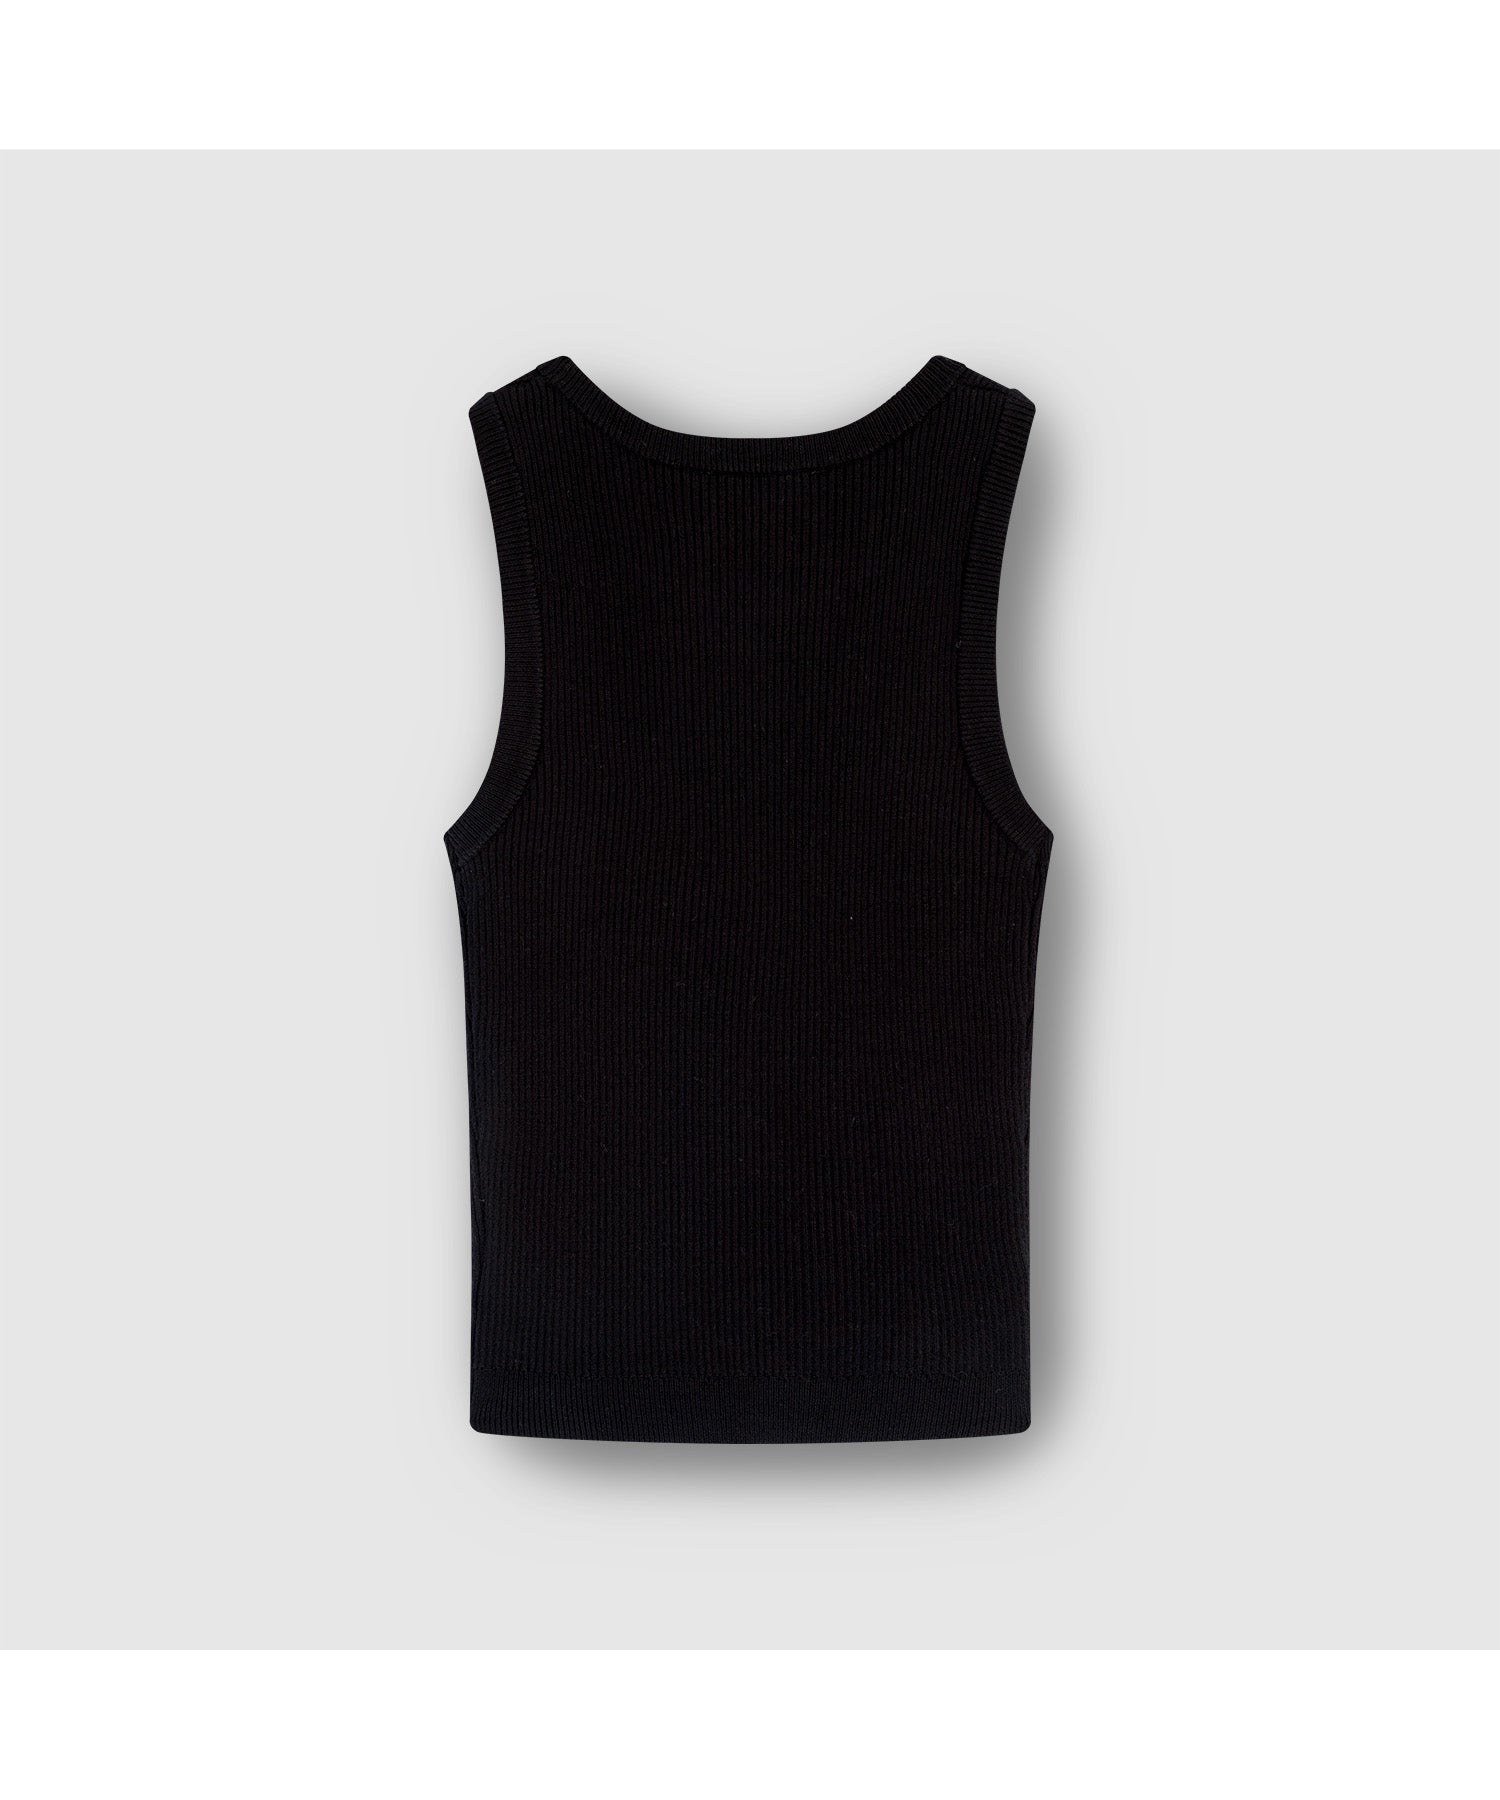 American sleeve rib tank top with front logo / inner 